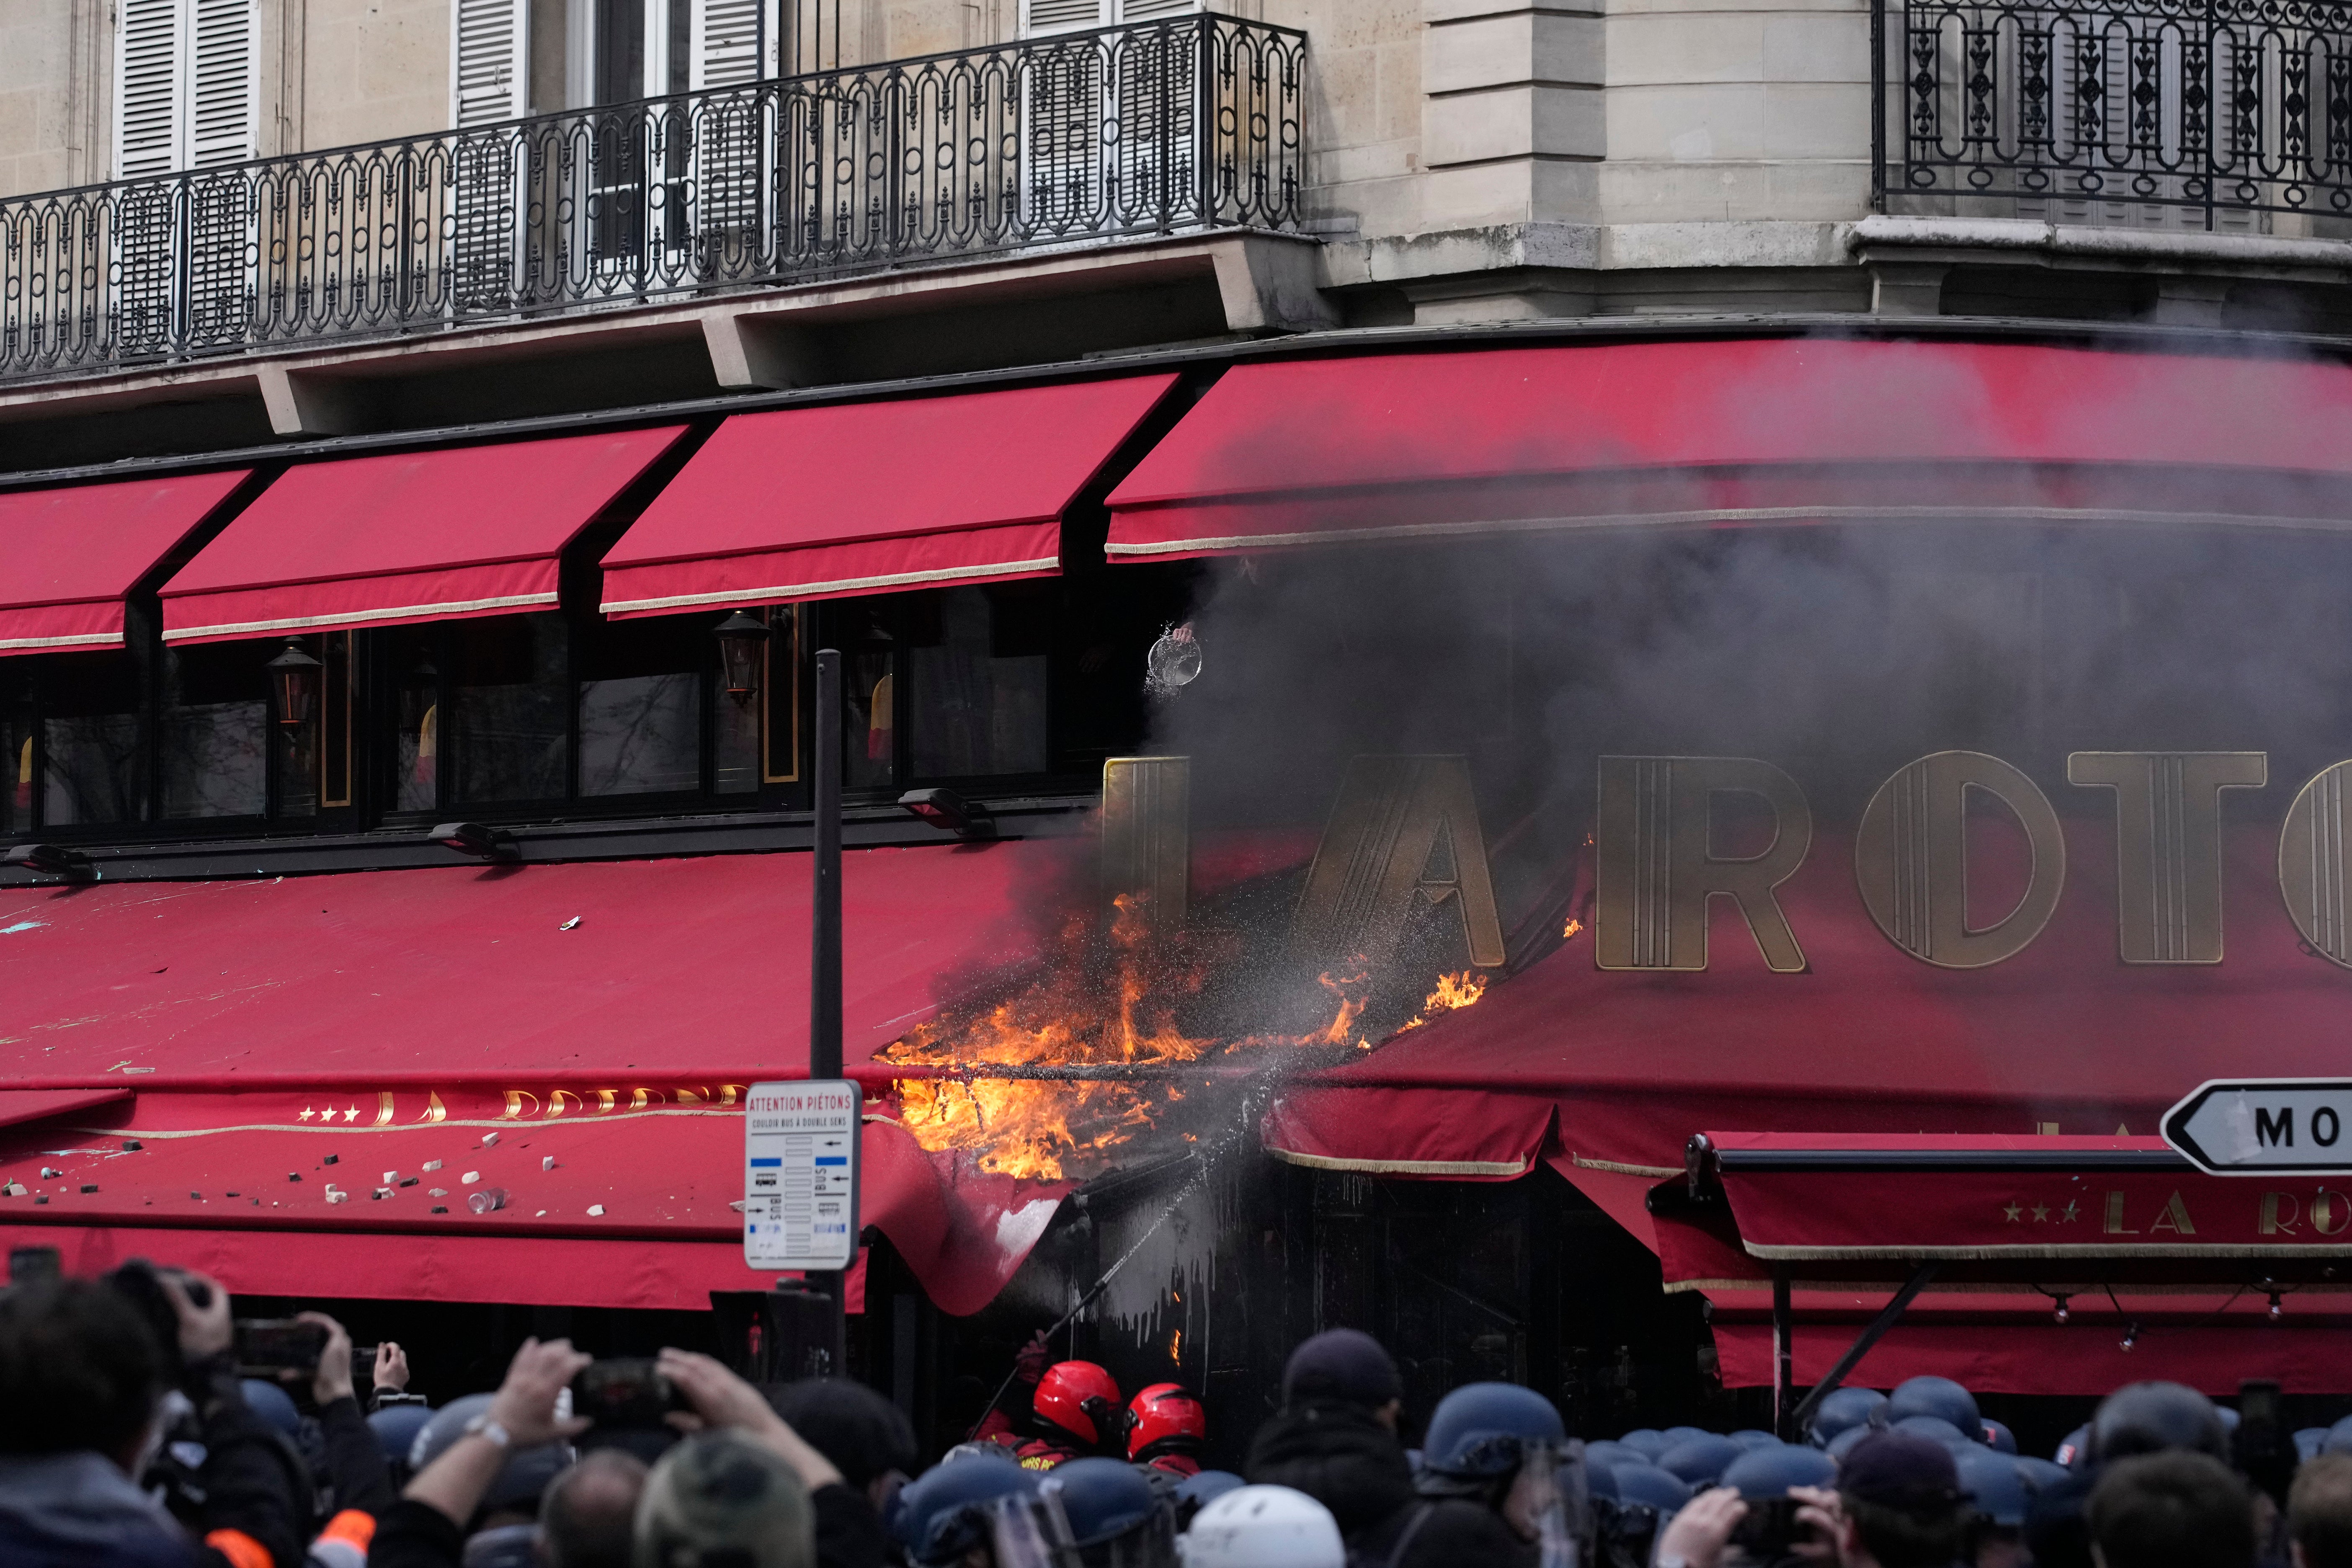 A restaurant awning burns in Paris on the latest day of strikes and protests